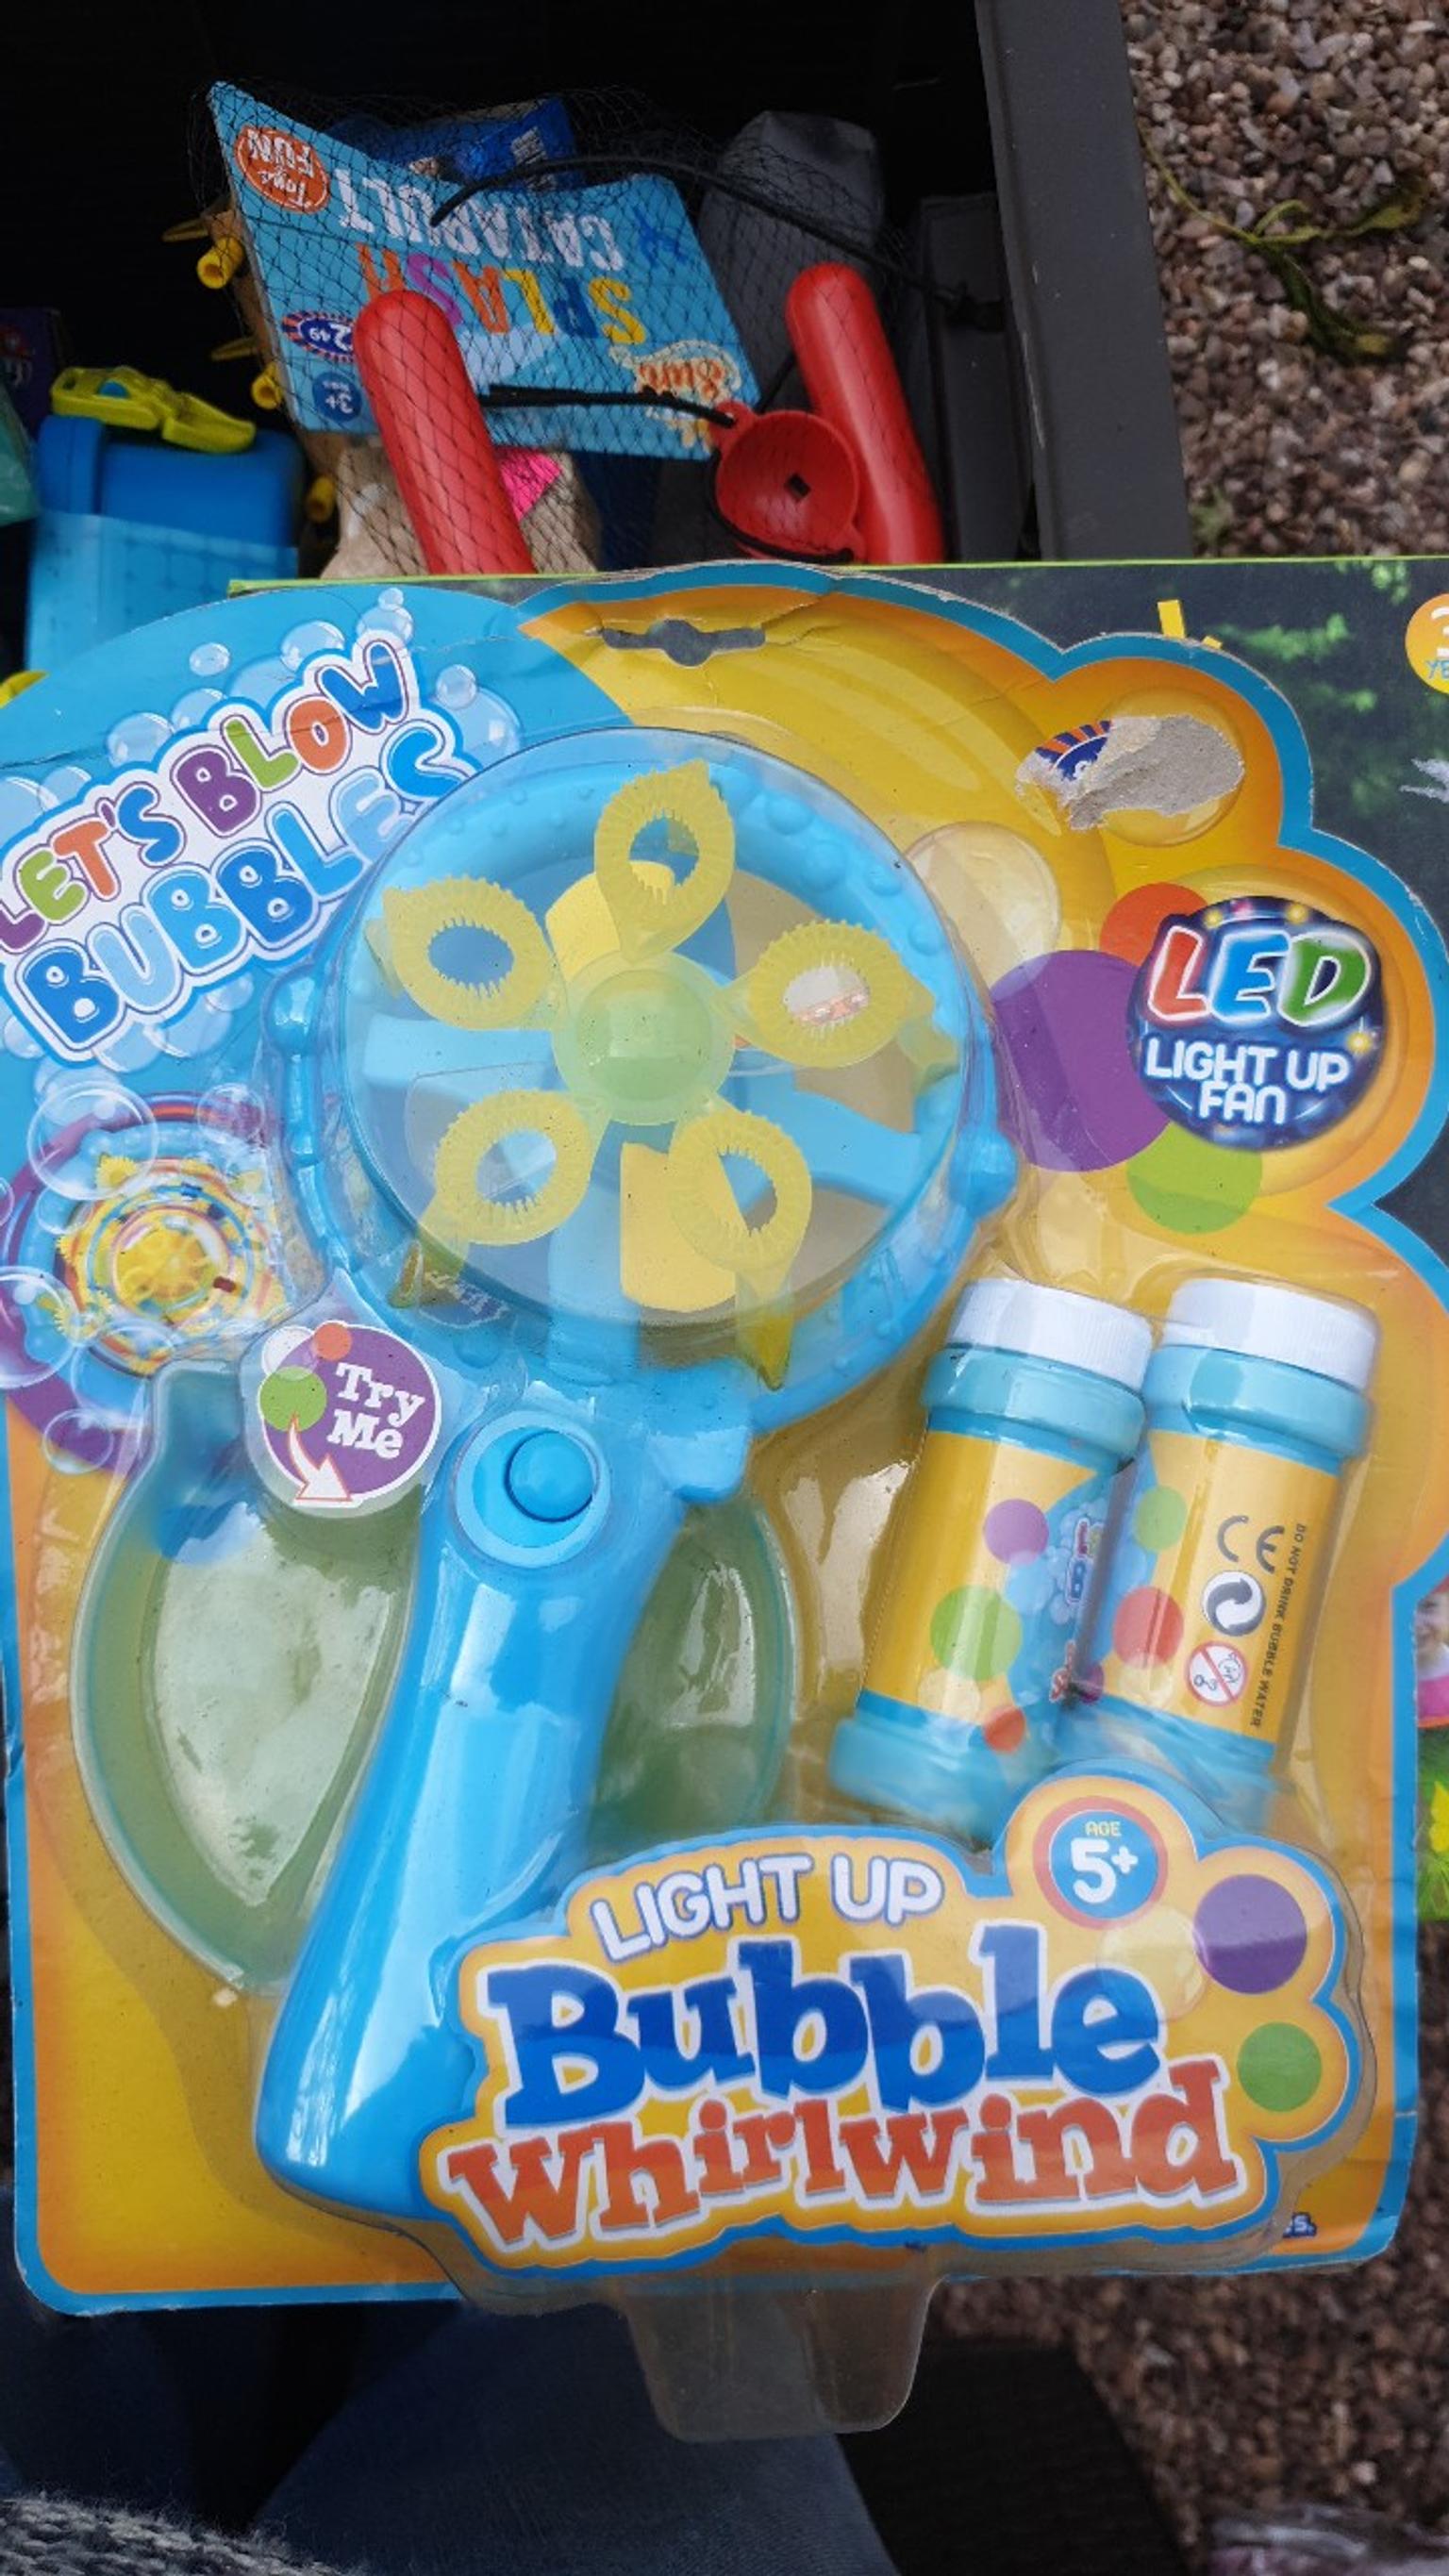 Bubble factory LED Light up bubble whirlwind wand toy Available in Blue and Red 